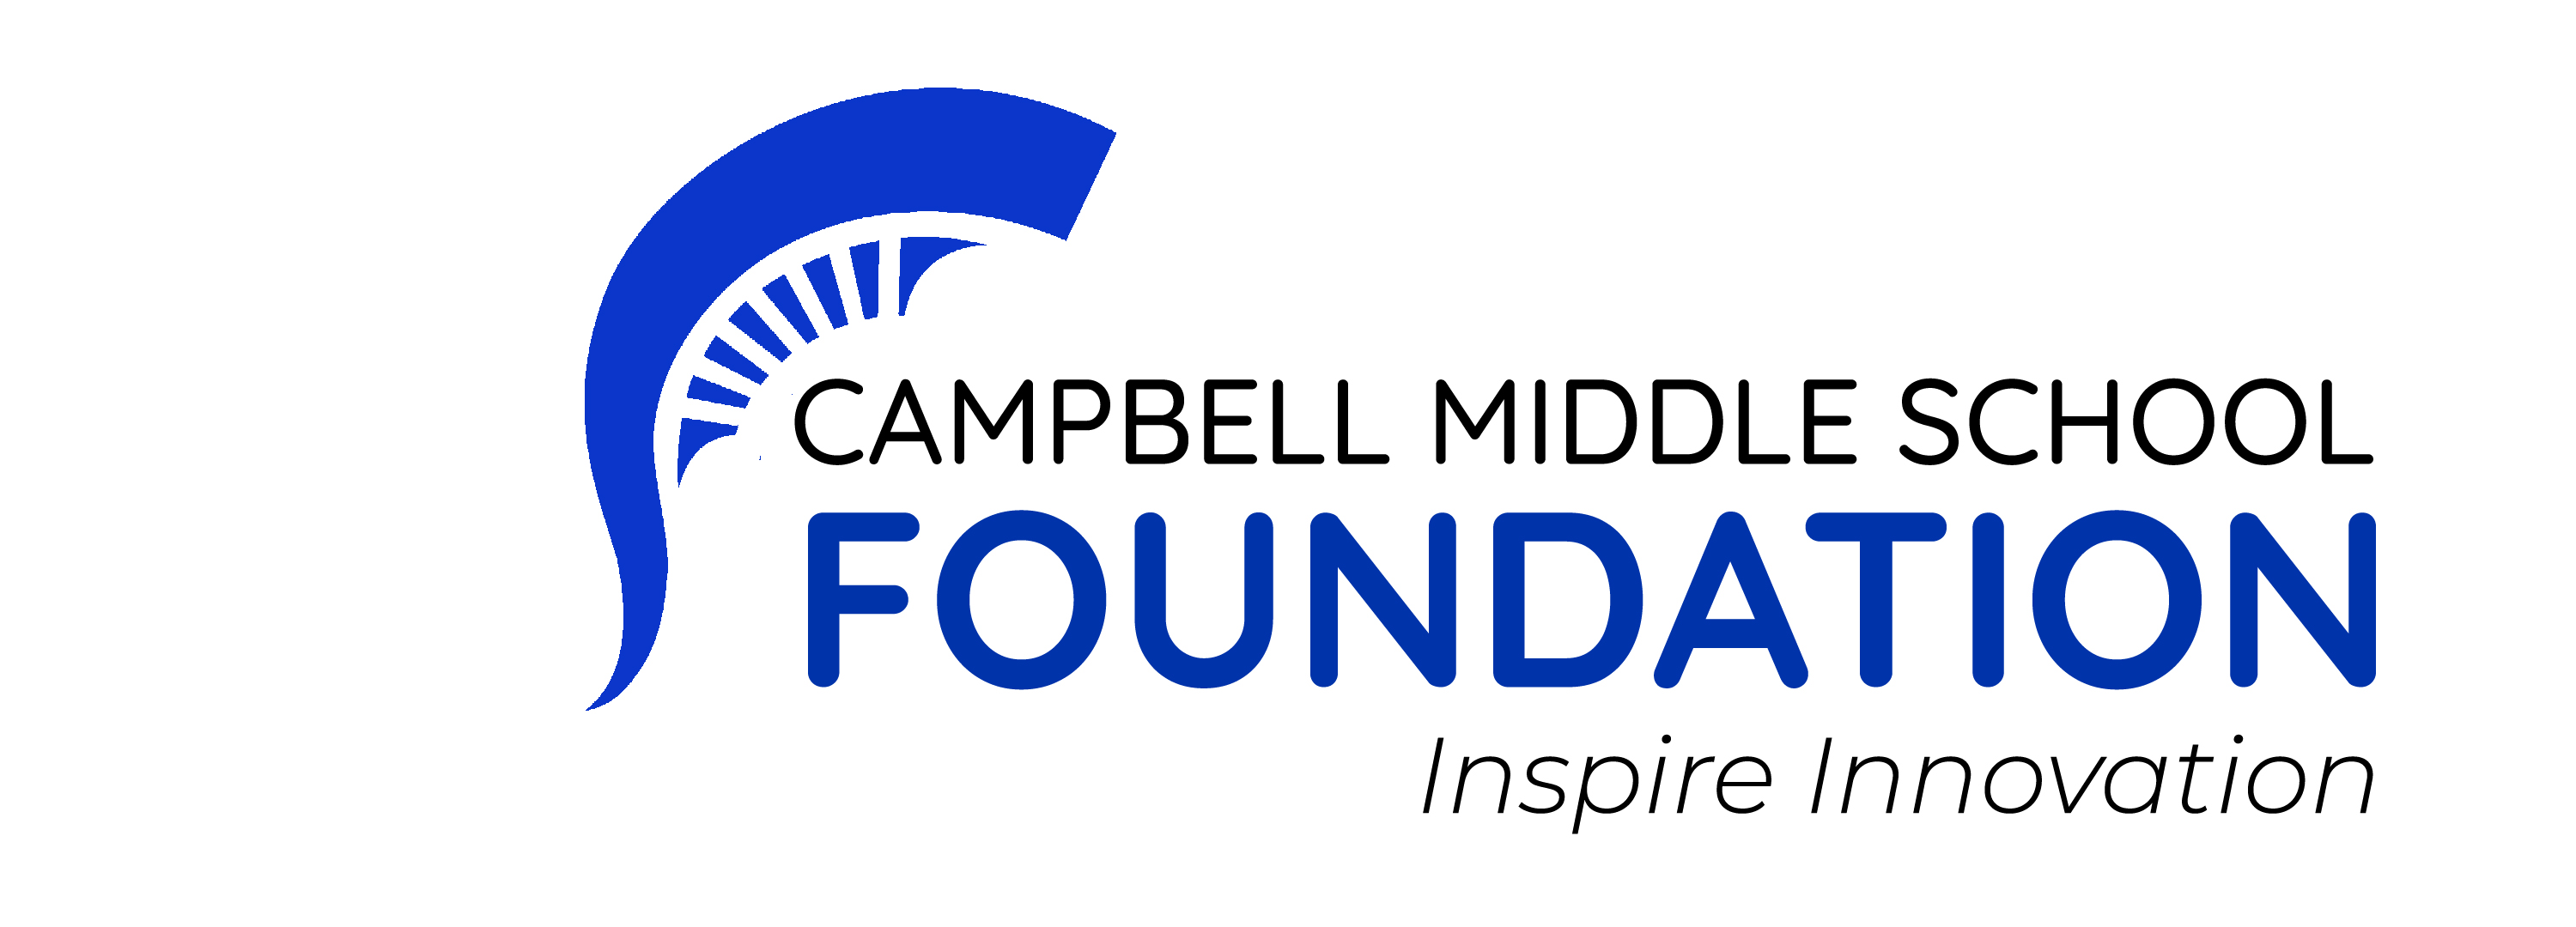 Campbell Middle School Foundation